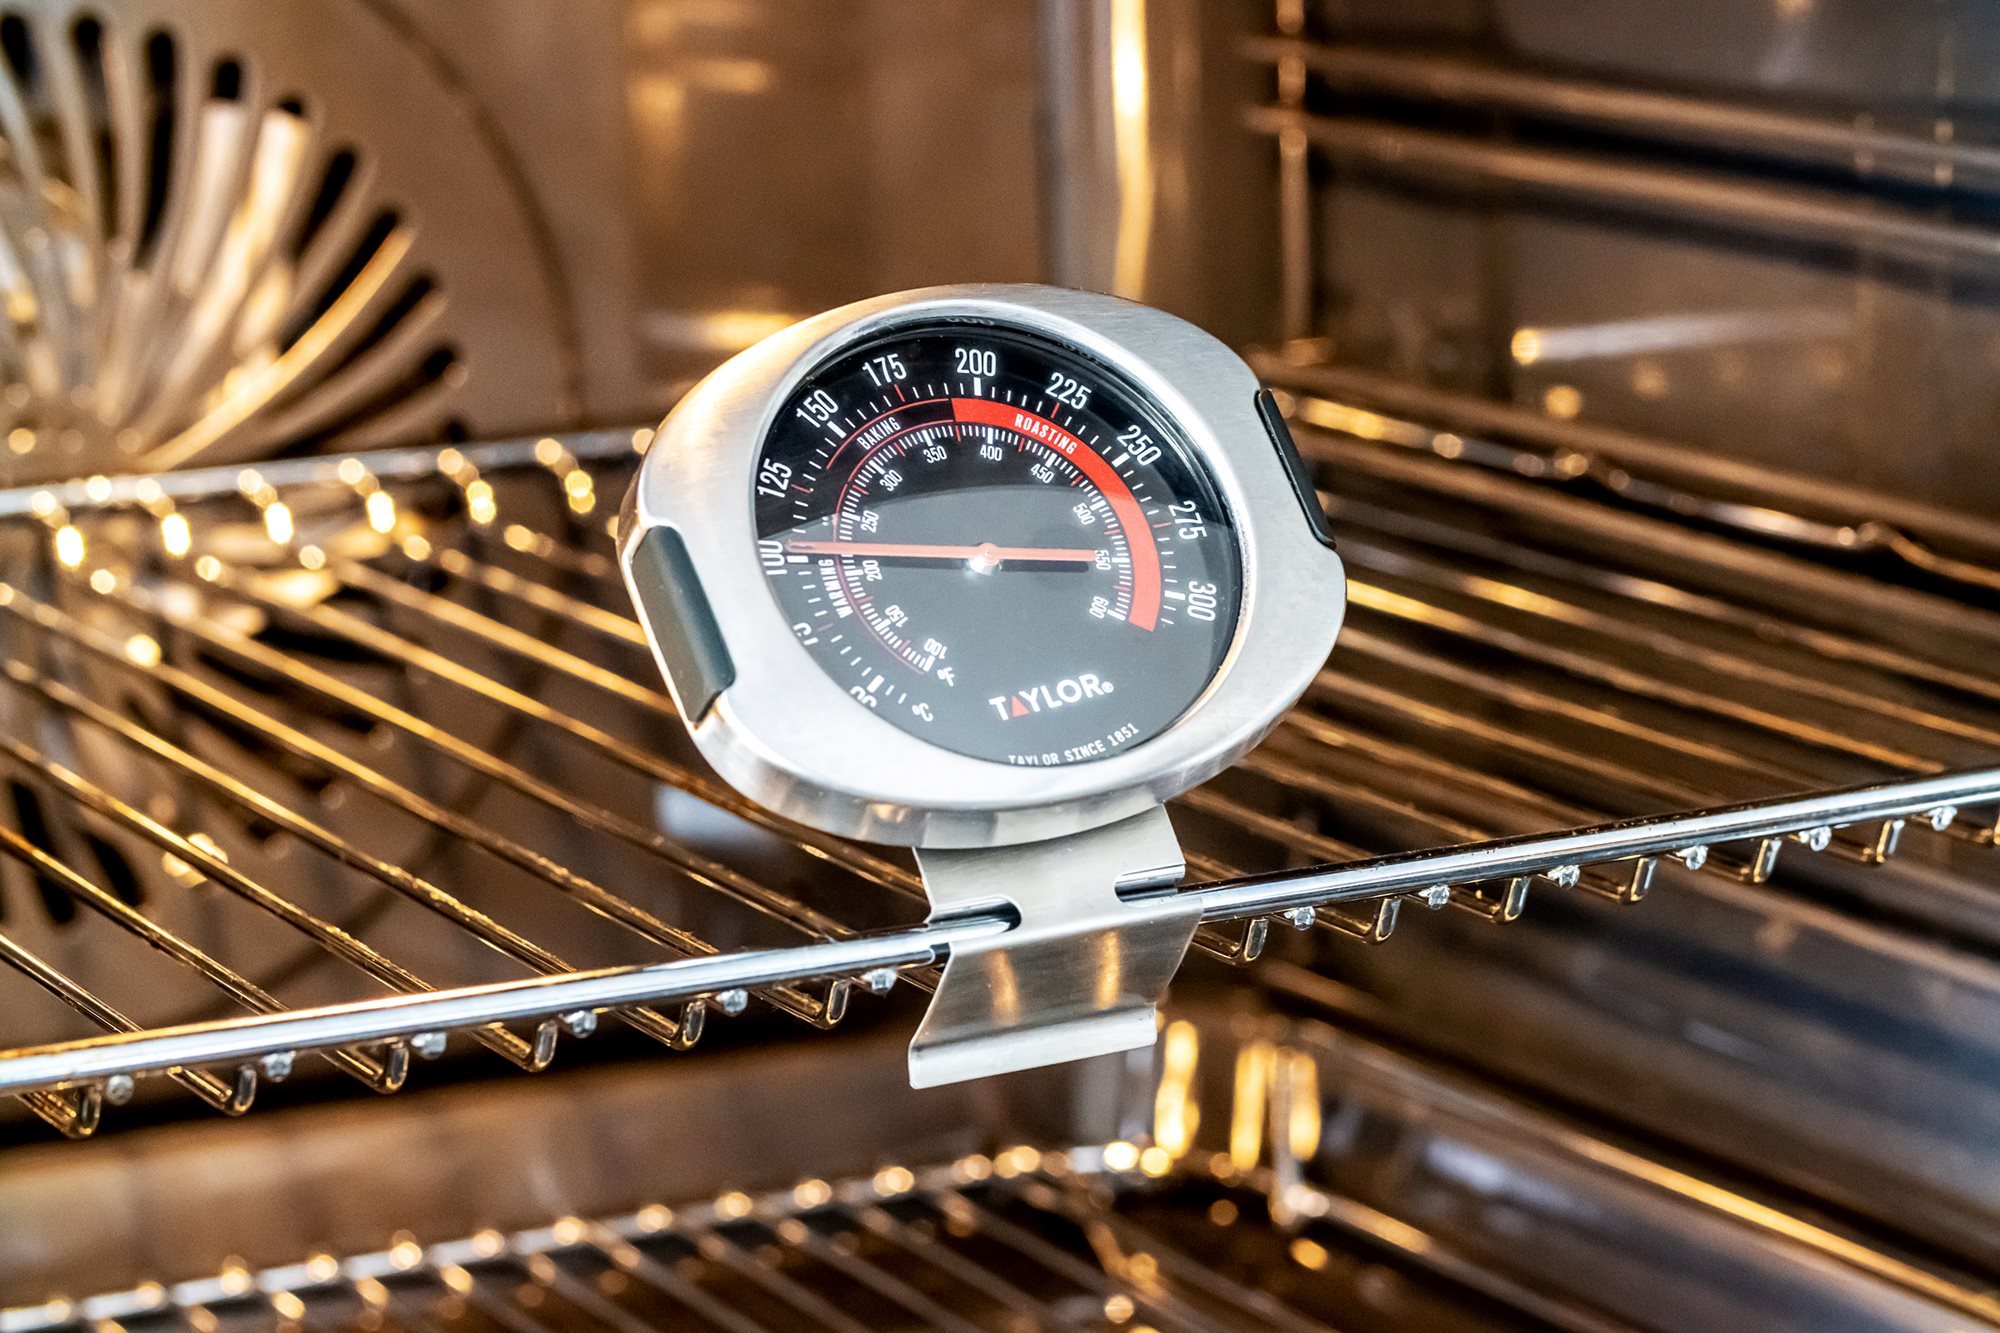 Oven thermometer, Taylor Pro - Kitchen Craft